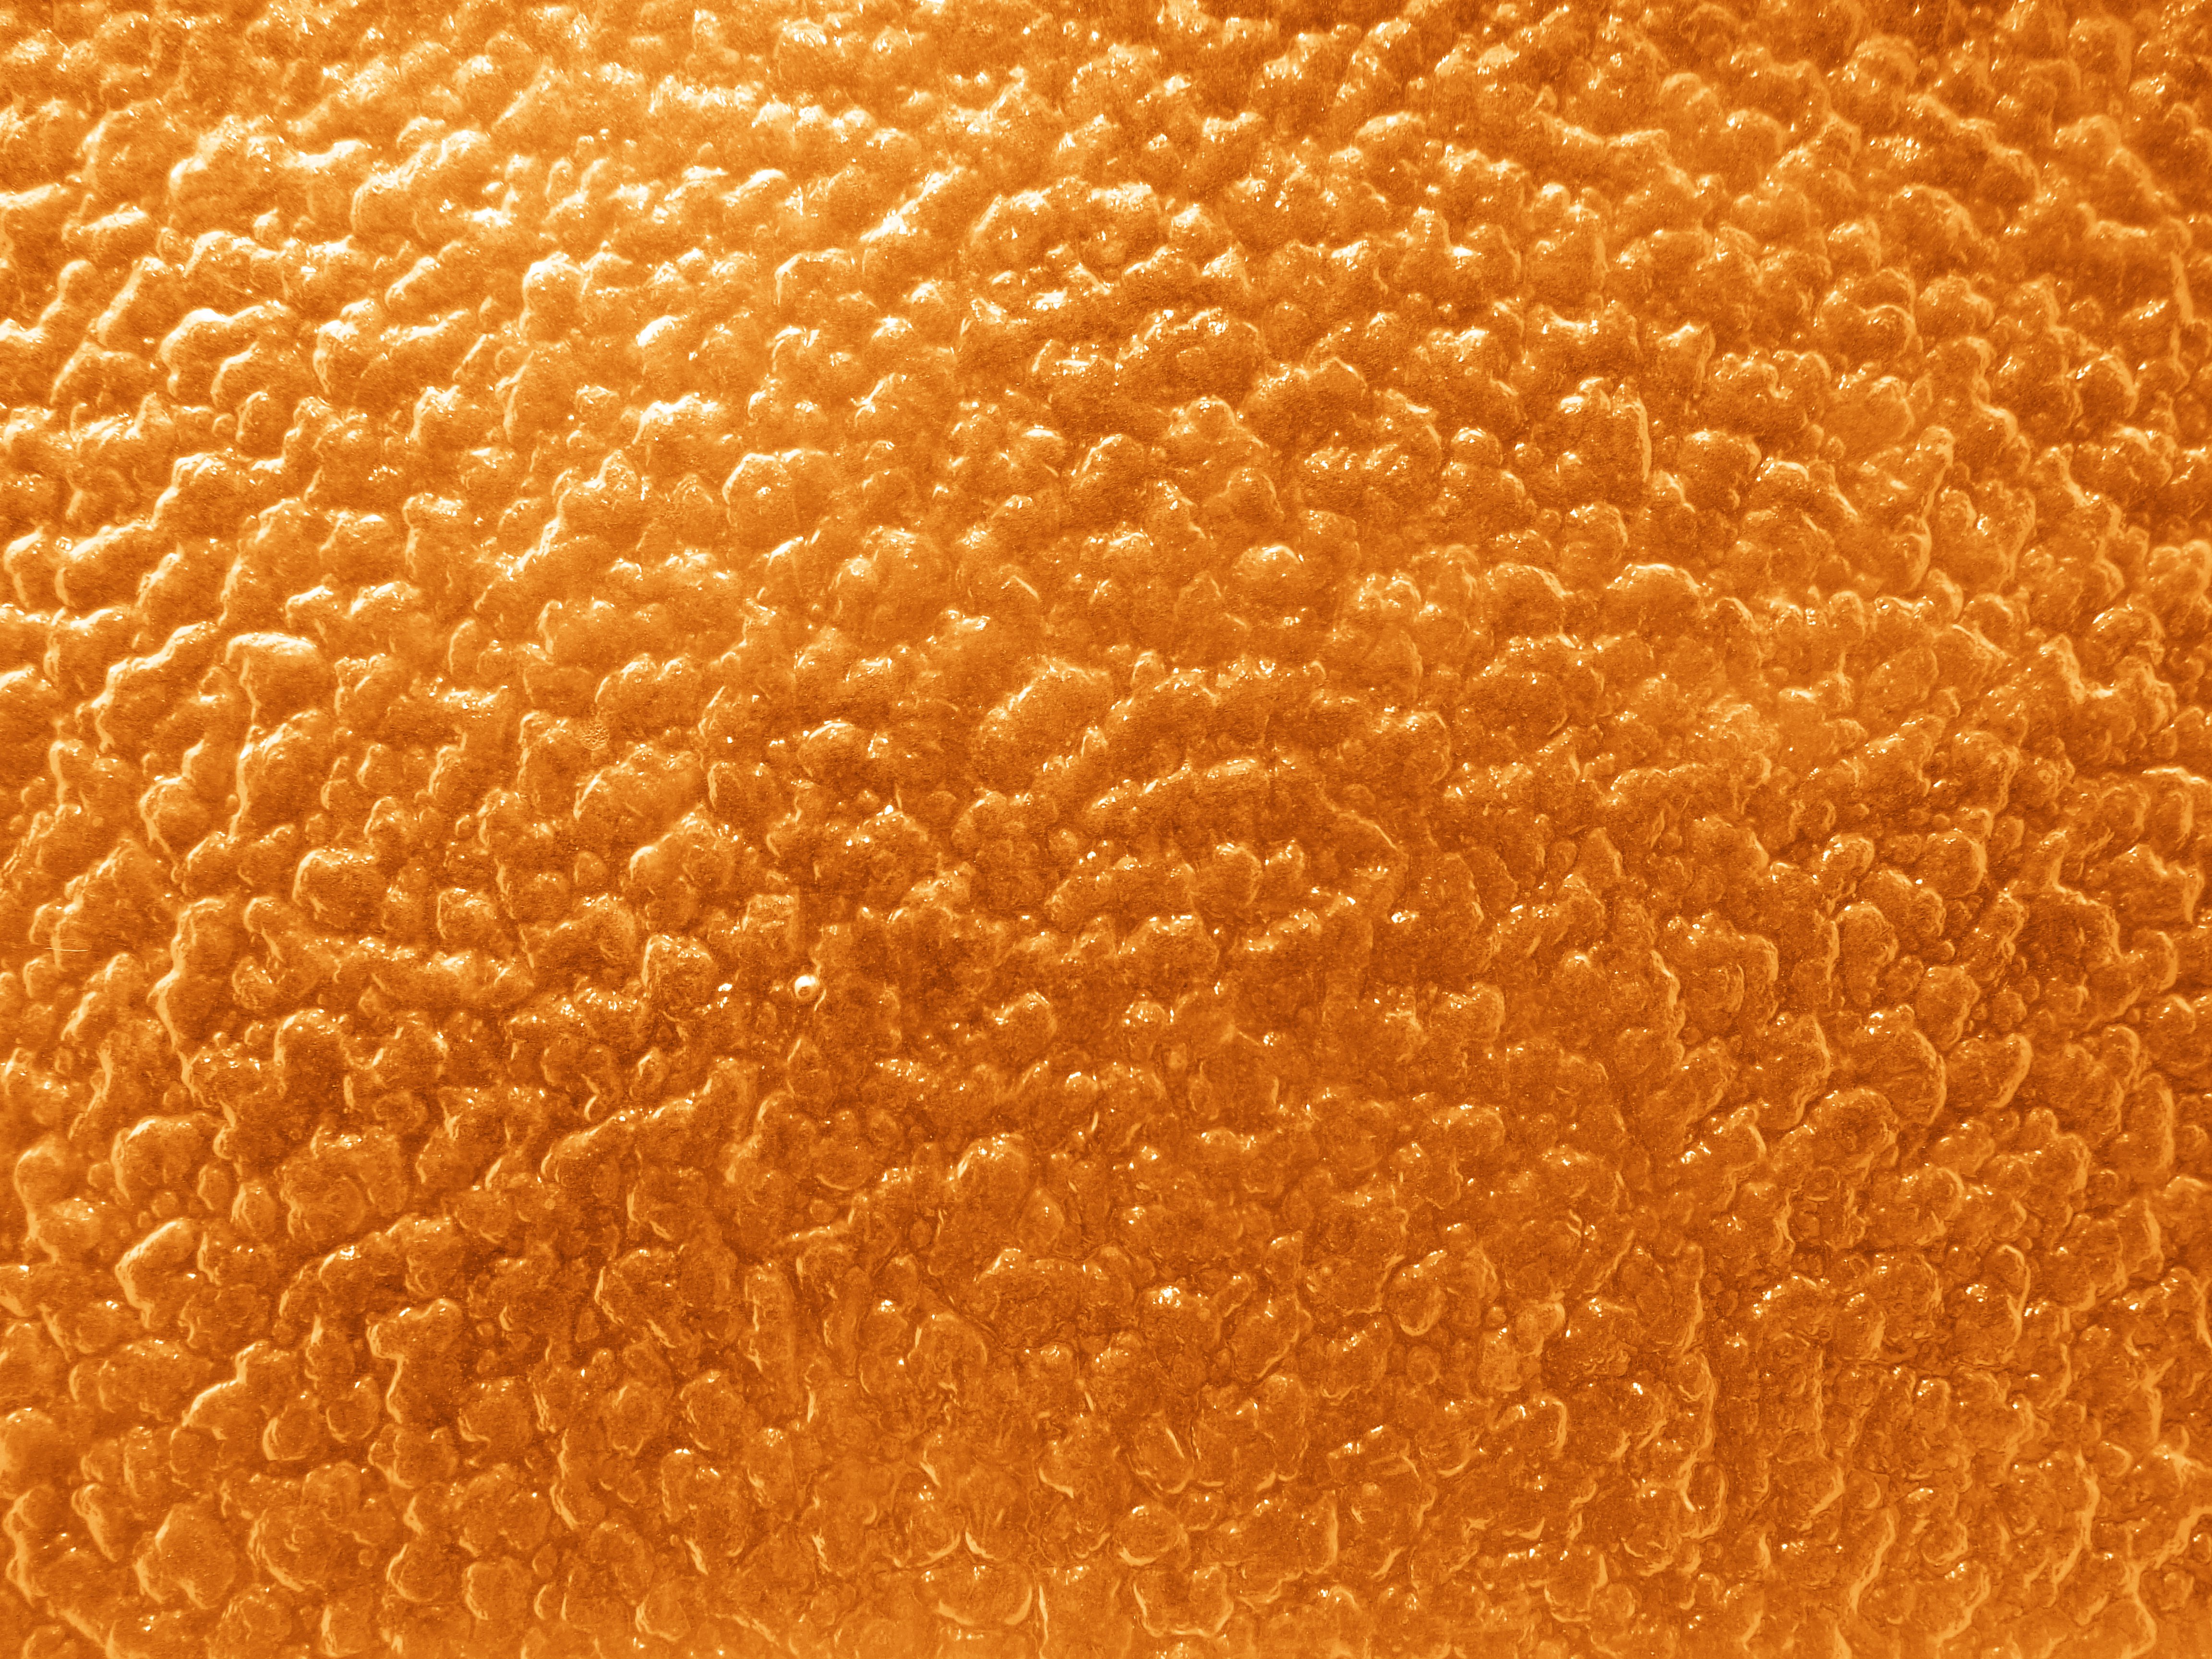 Orange Textured Glass with Bumpy Surface Picture | Free Photograph ...